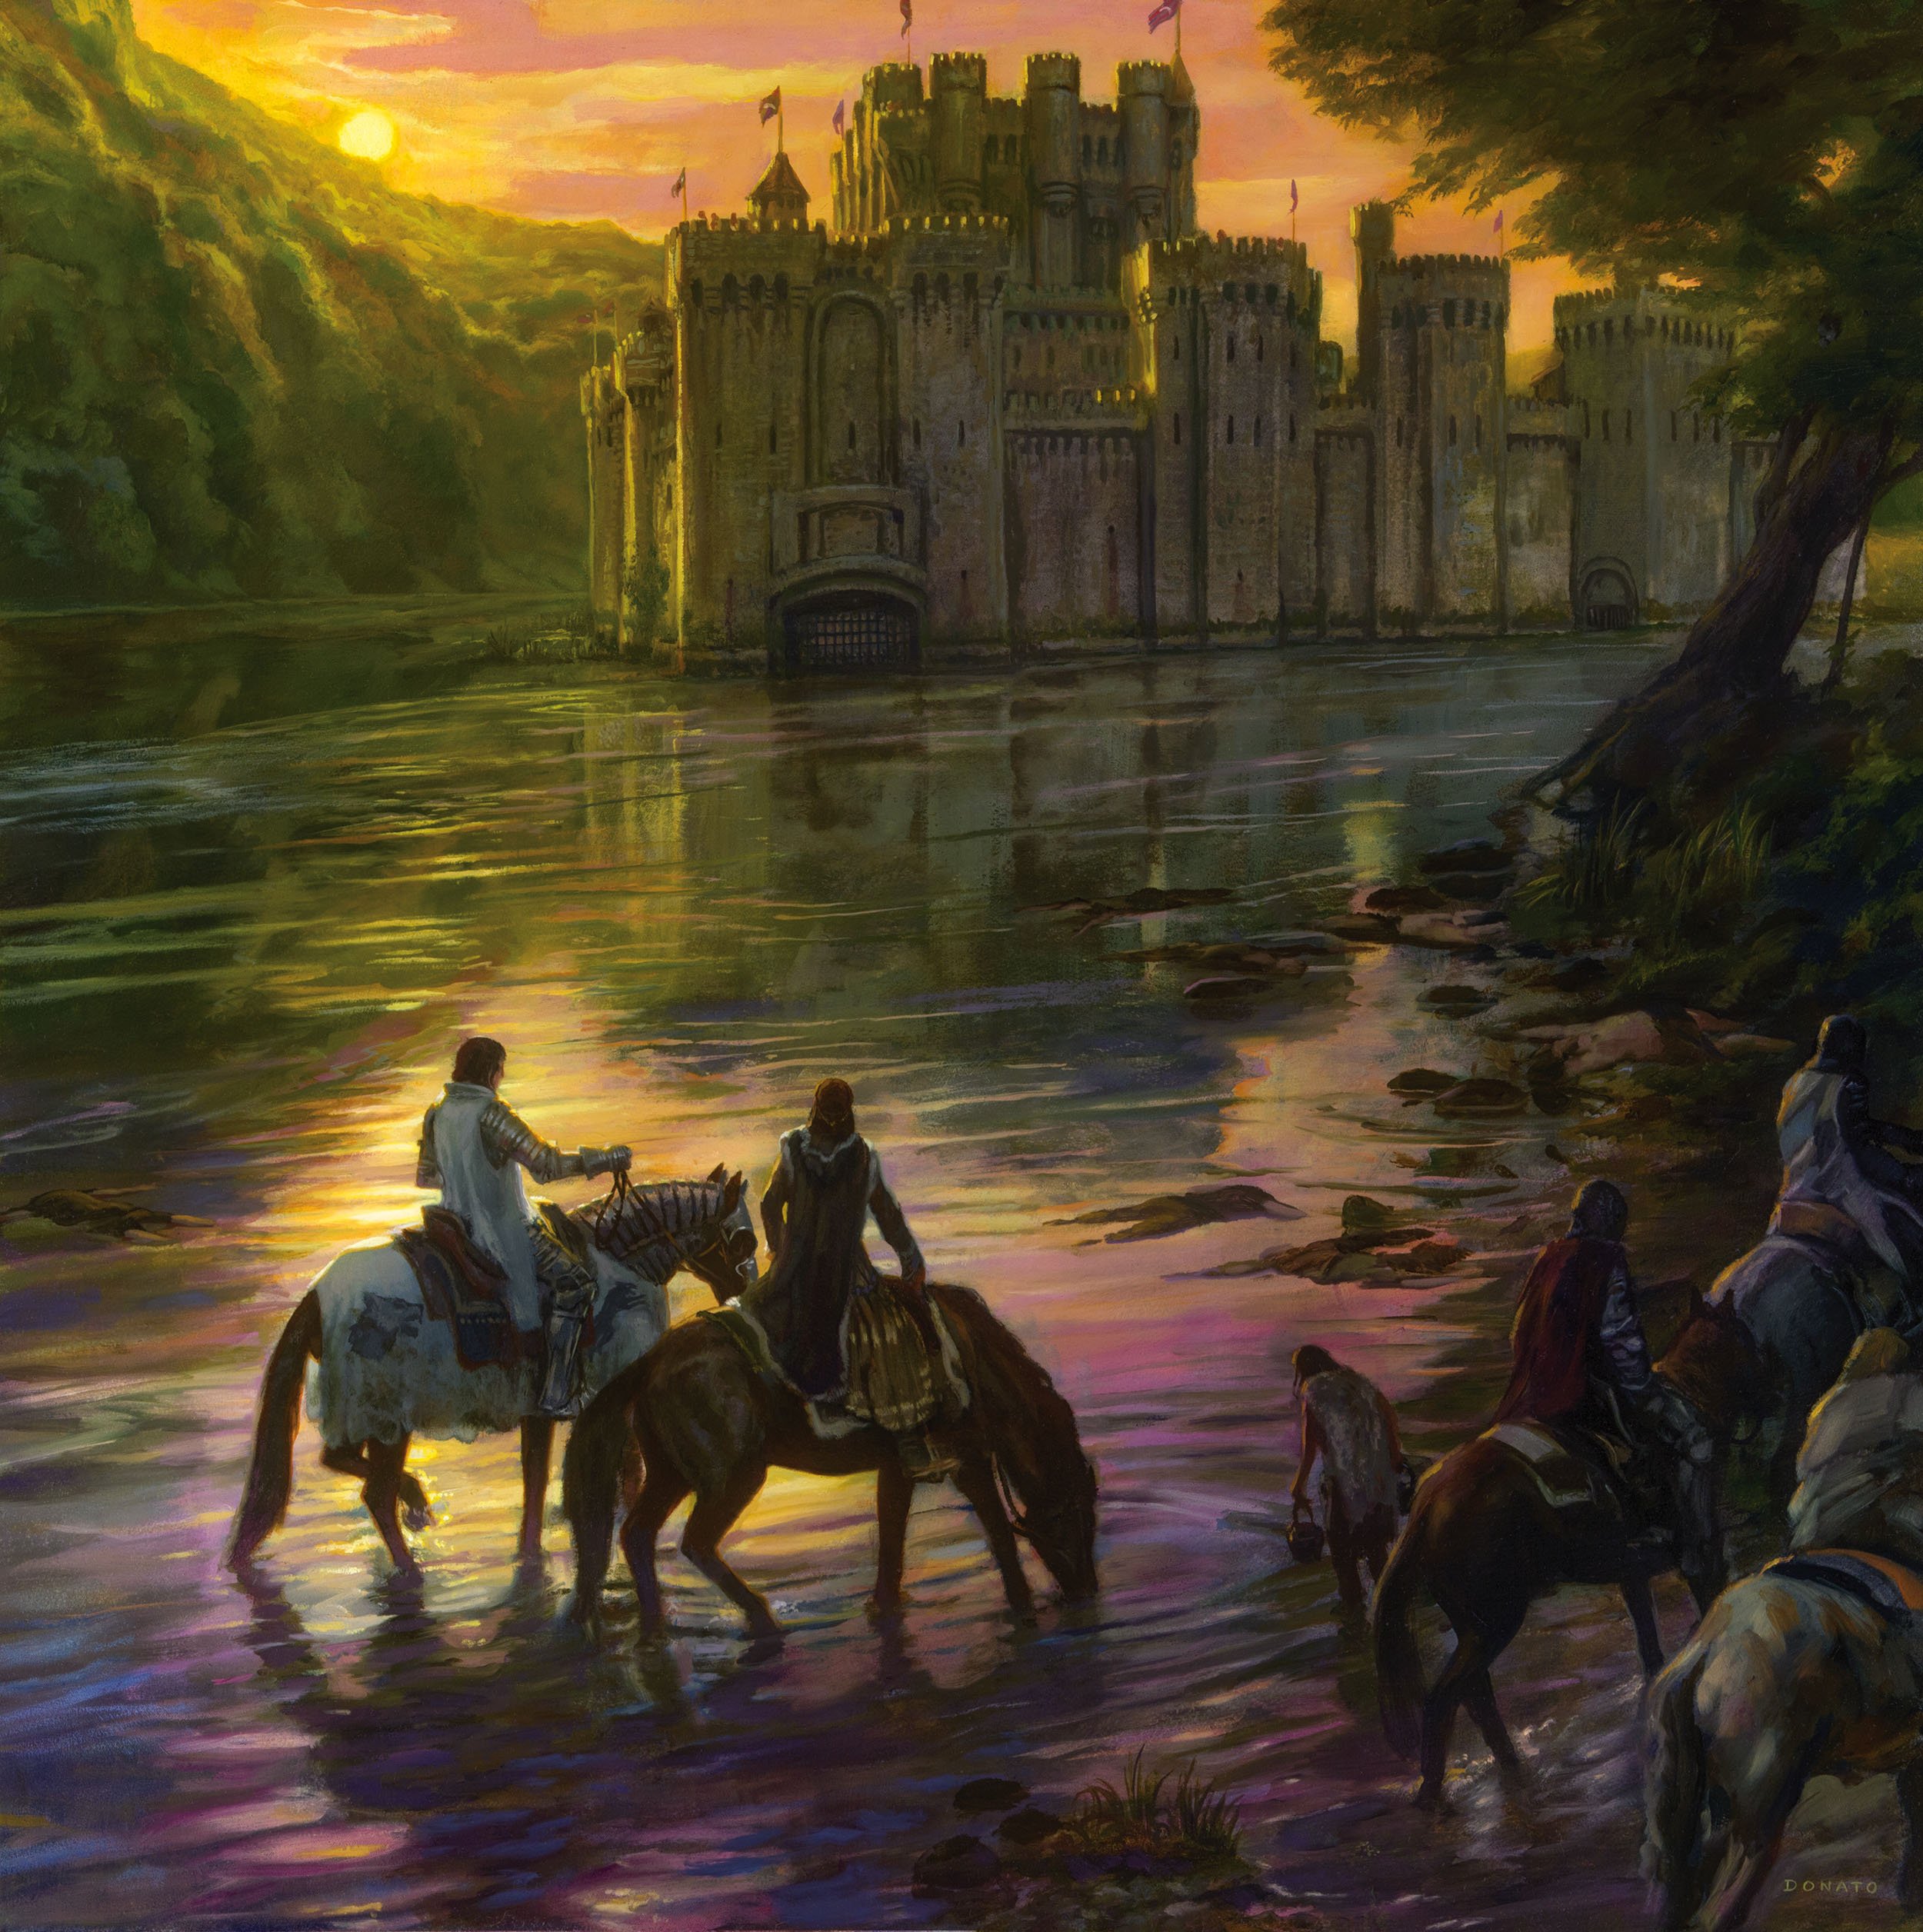 Riverrun - Catelyn and Robb Stark
30" x 30"  oil on Panel  2014
Collection of George R.R. Martin